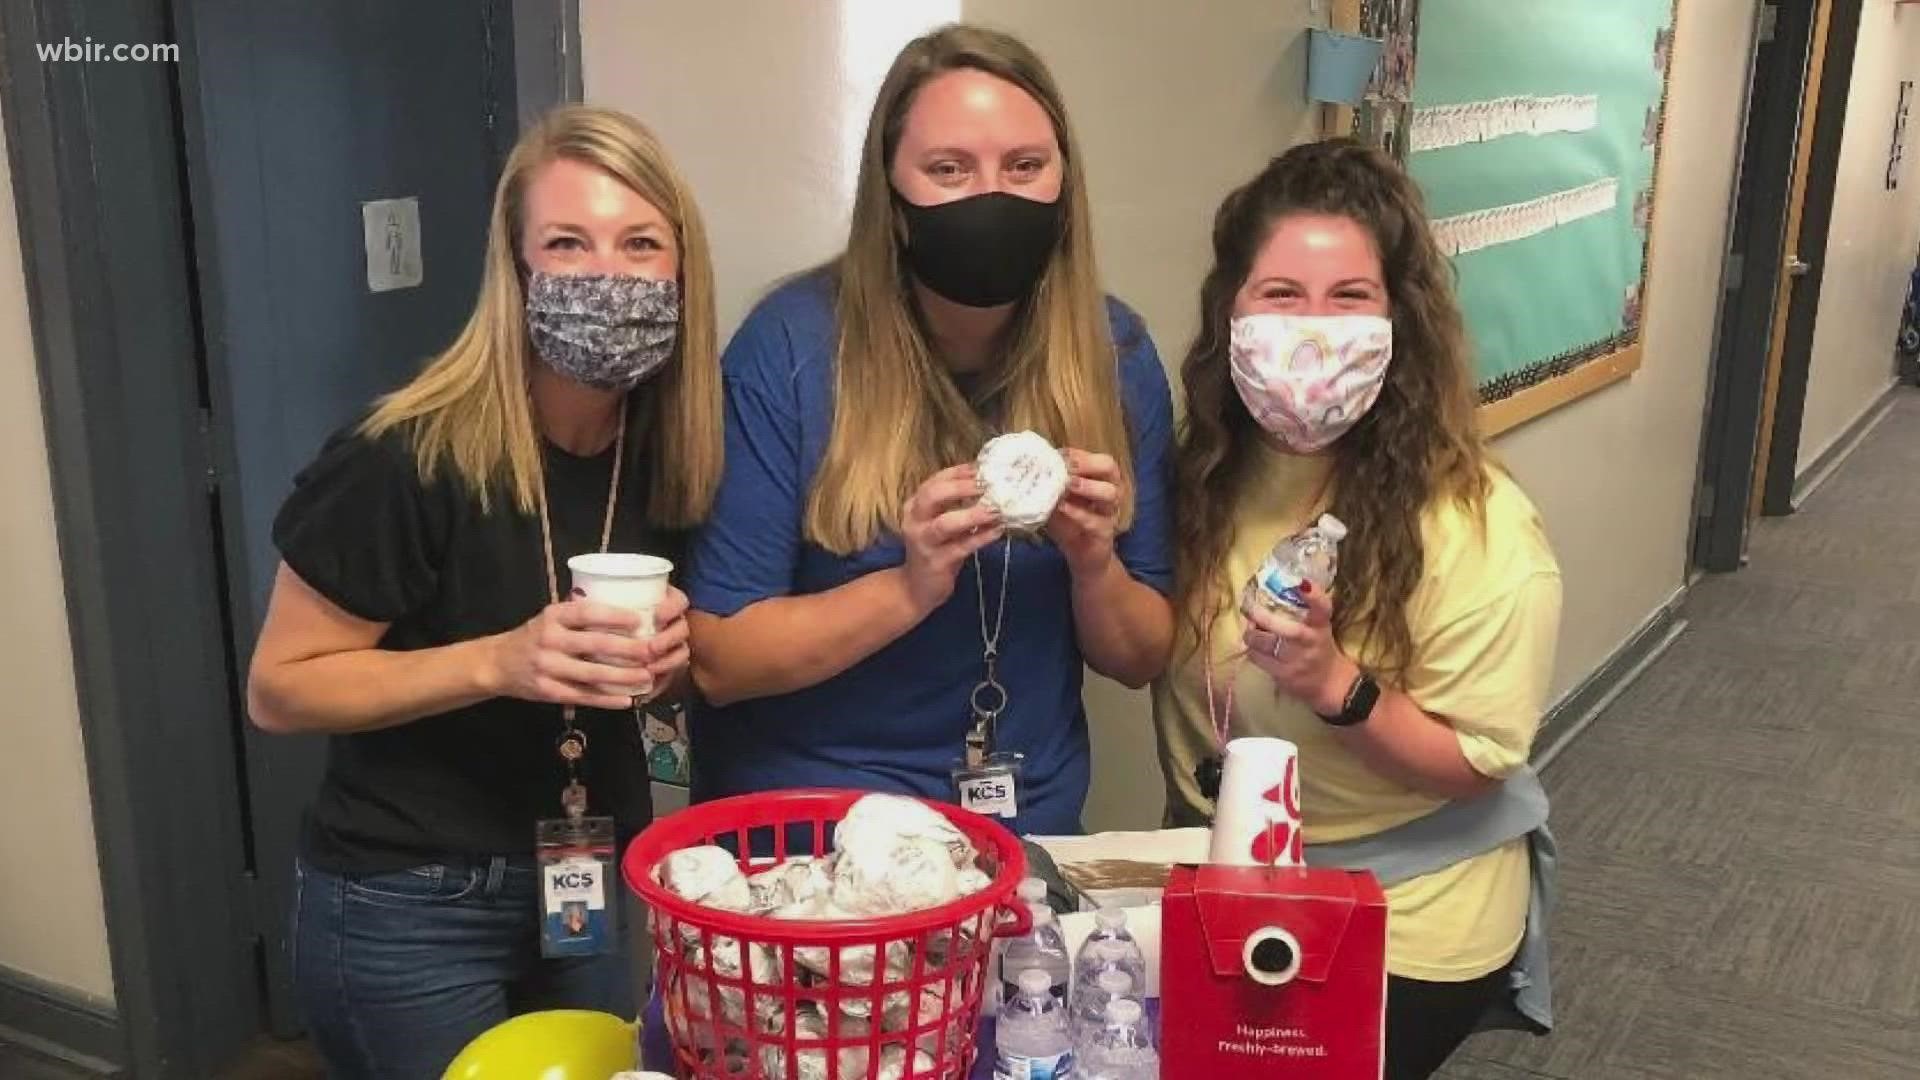 In the face of the mask debate and other challenges tied to the virus, teachers continue to show up day in and day out. Parents wanted to show their thanks.